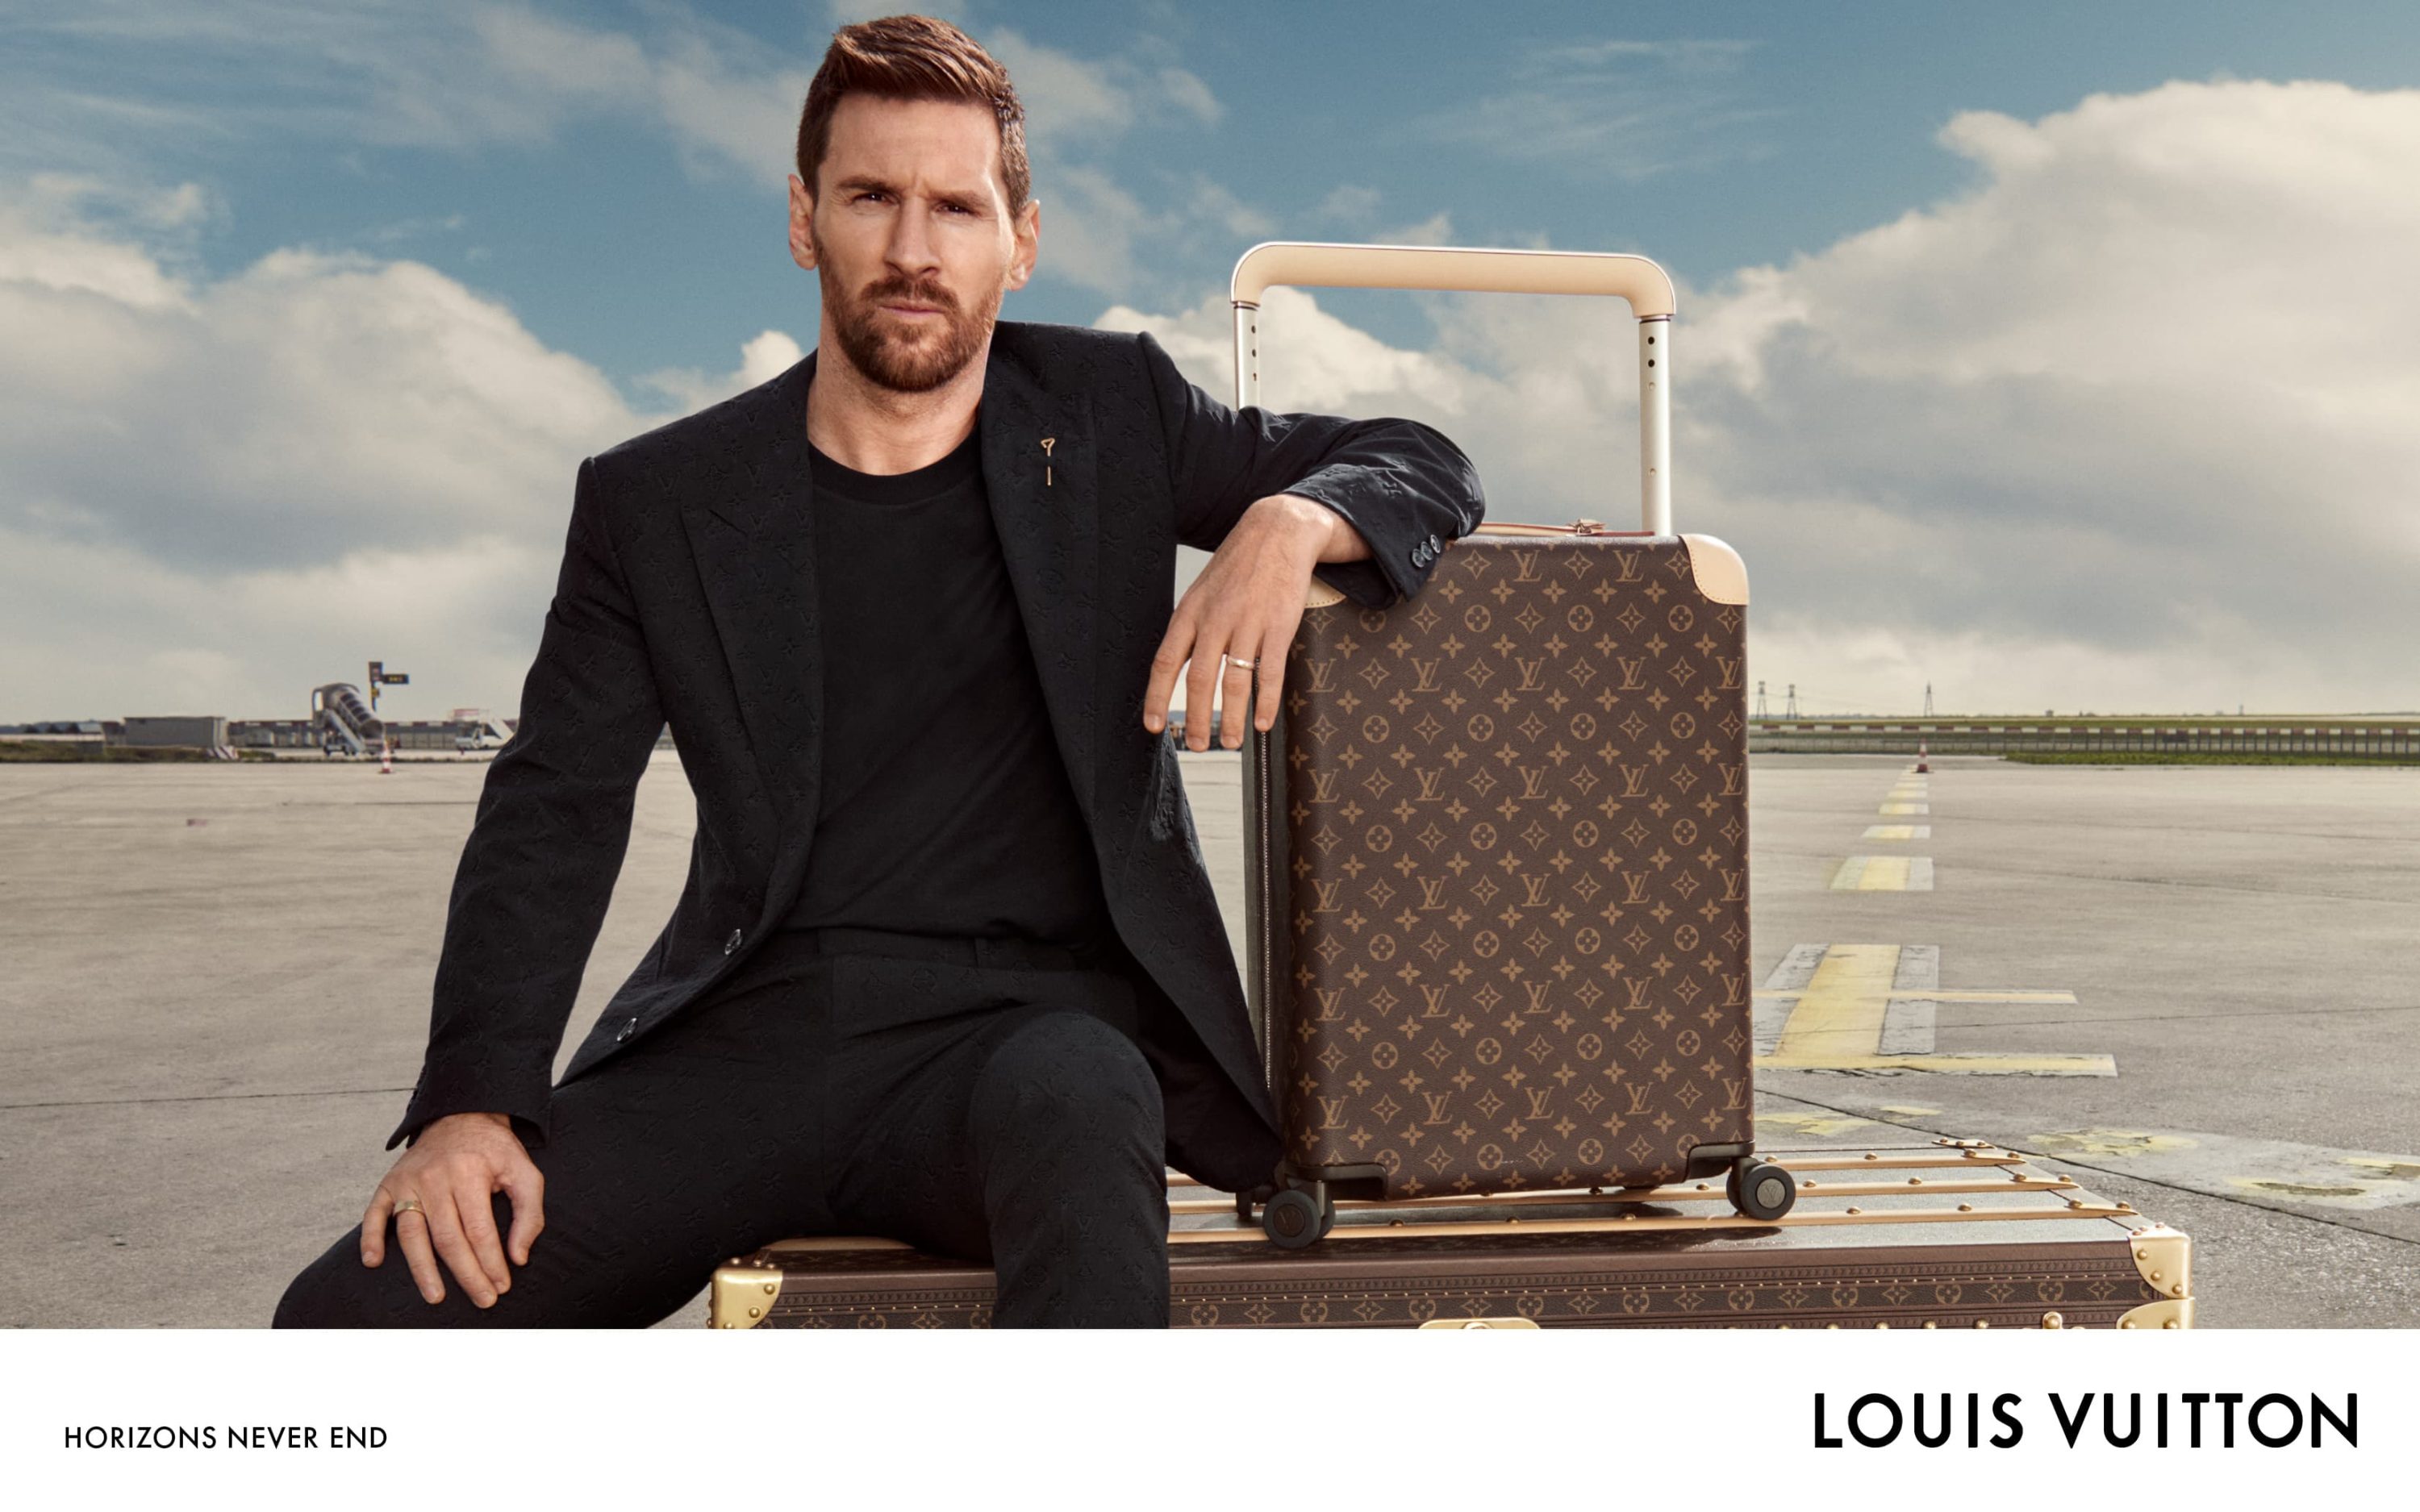 Lionel Messi Stars in Louis Vuitton 'Horizons Never End Travel